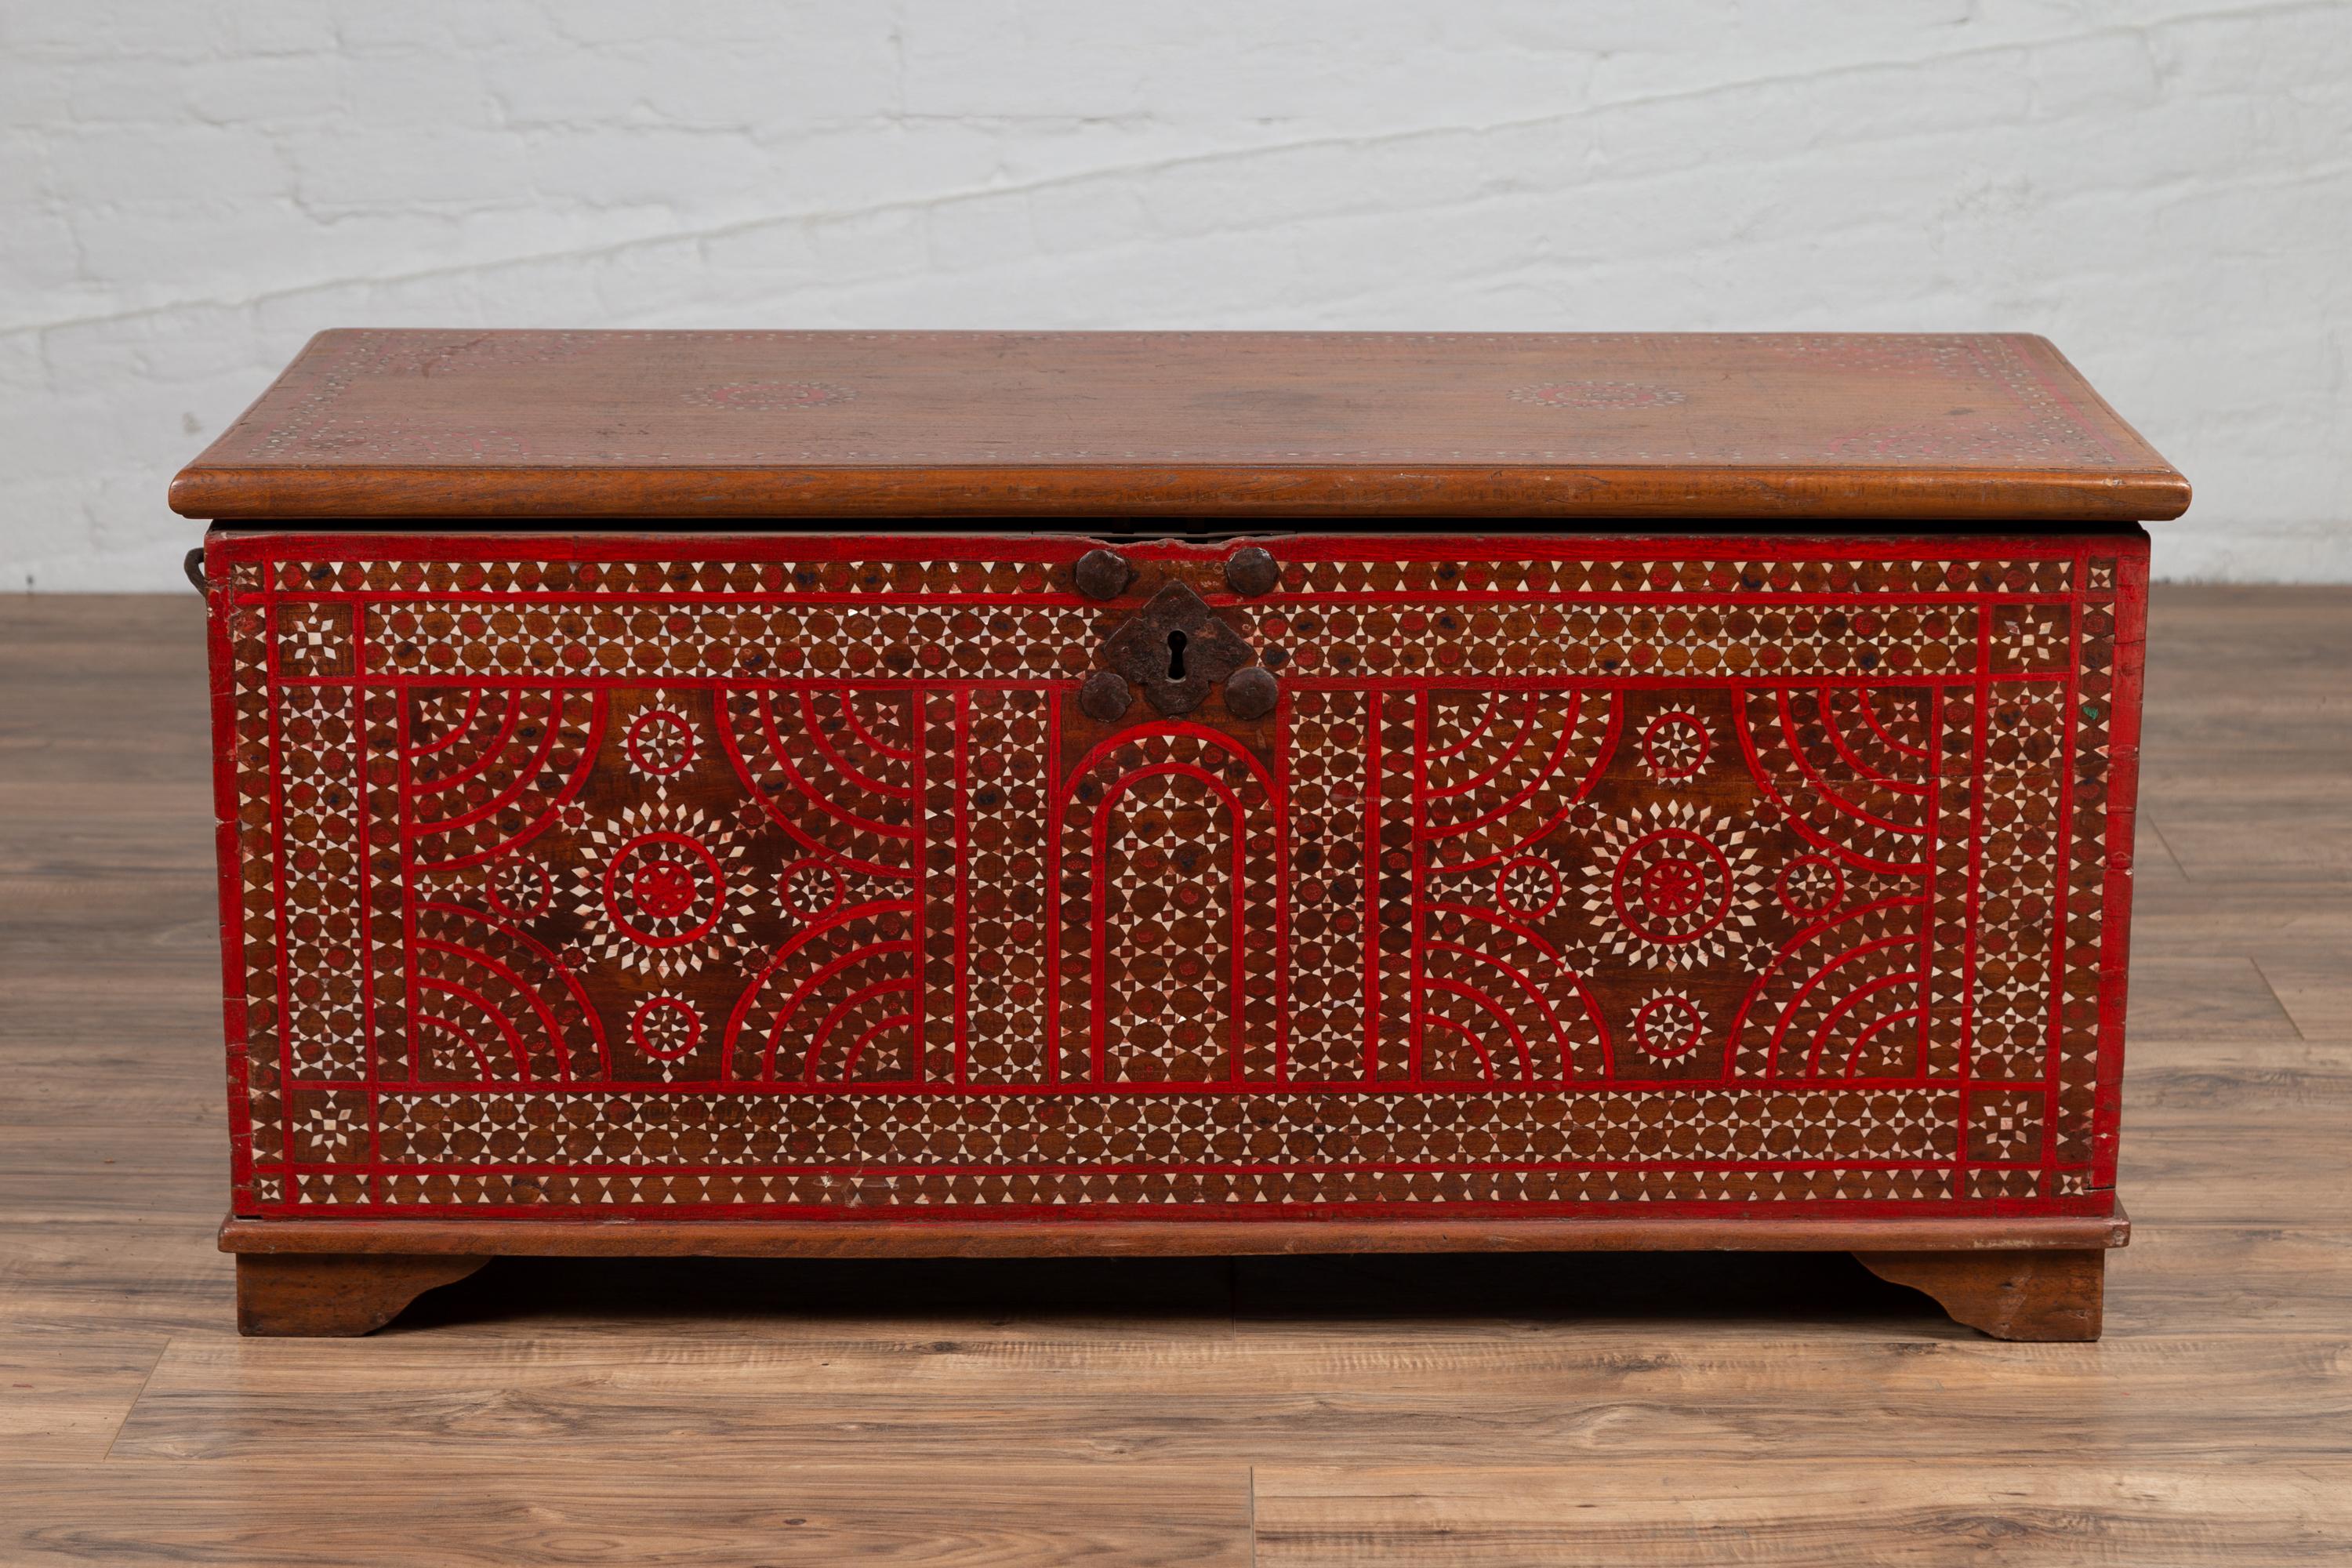 An antique 19th century Indonesian blanket chest from Madura, with red and brown accents and mother-of-pearl inlay. Born on the island of Madura off of the northeastern coast of Java, this exquisite blanket chest attracts our attention with its